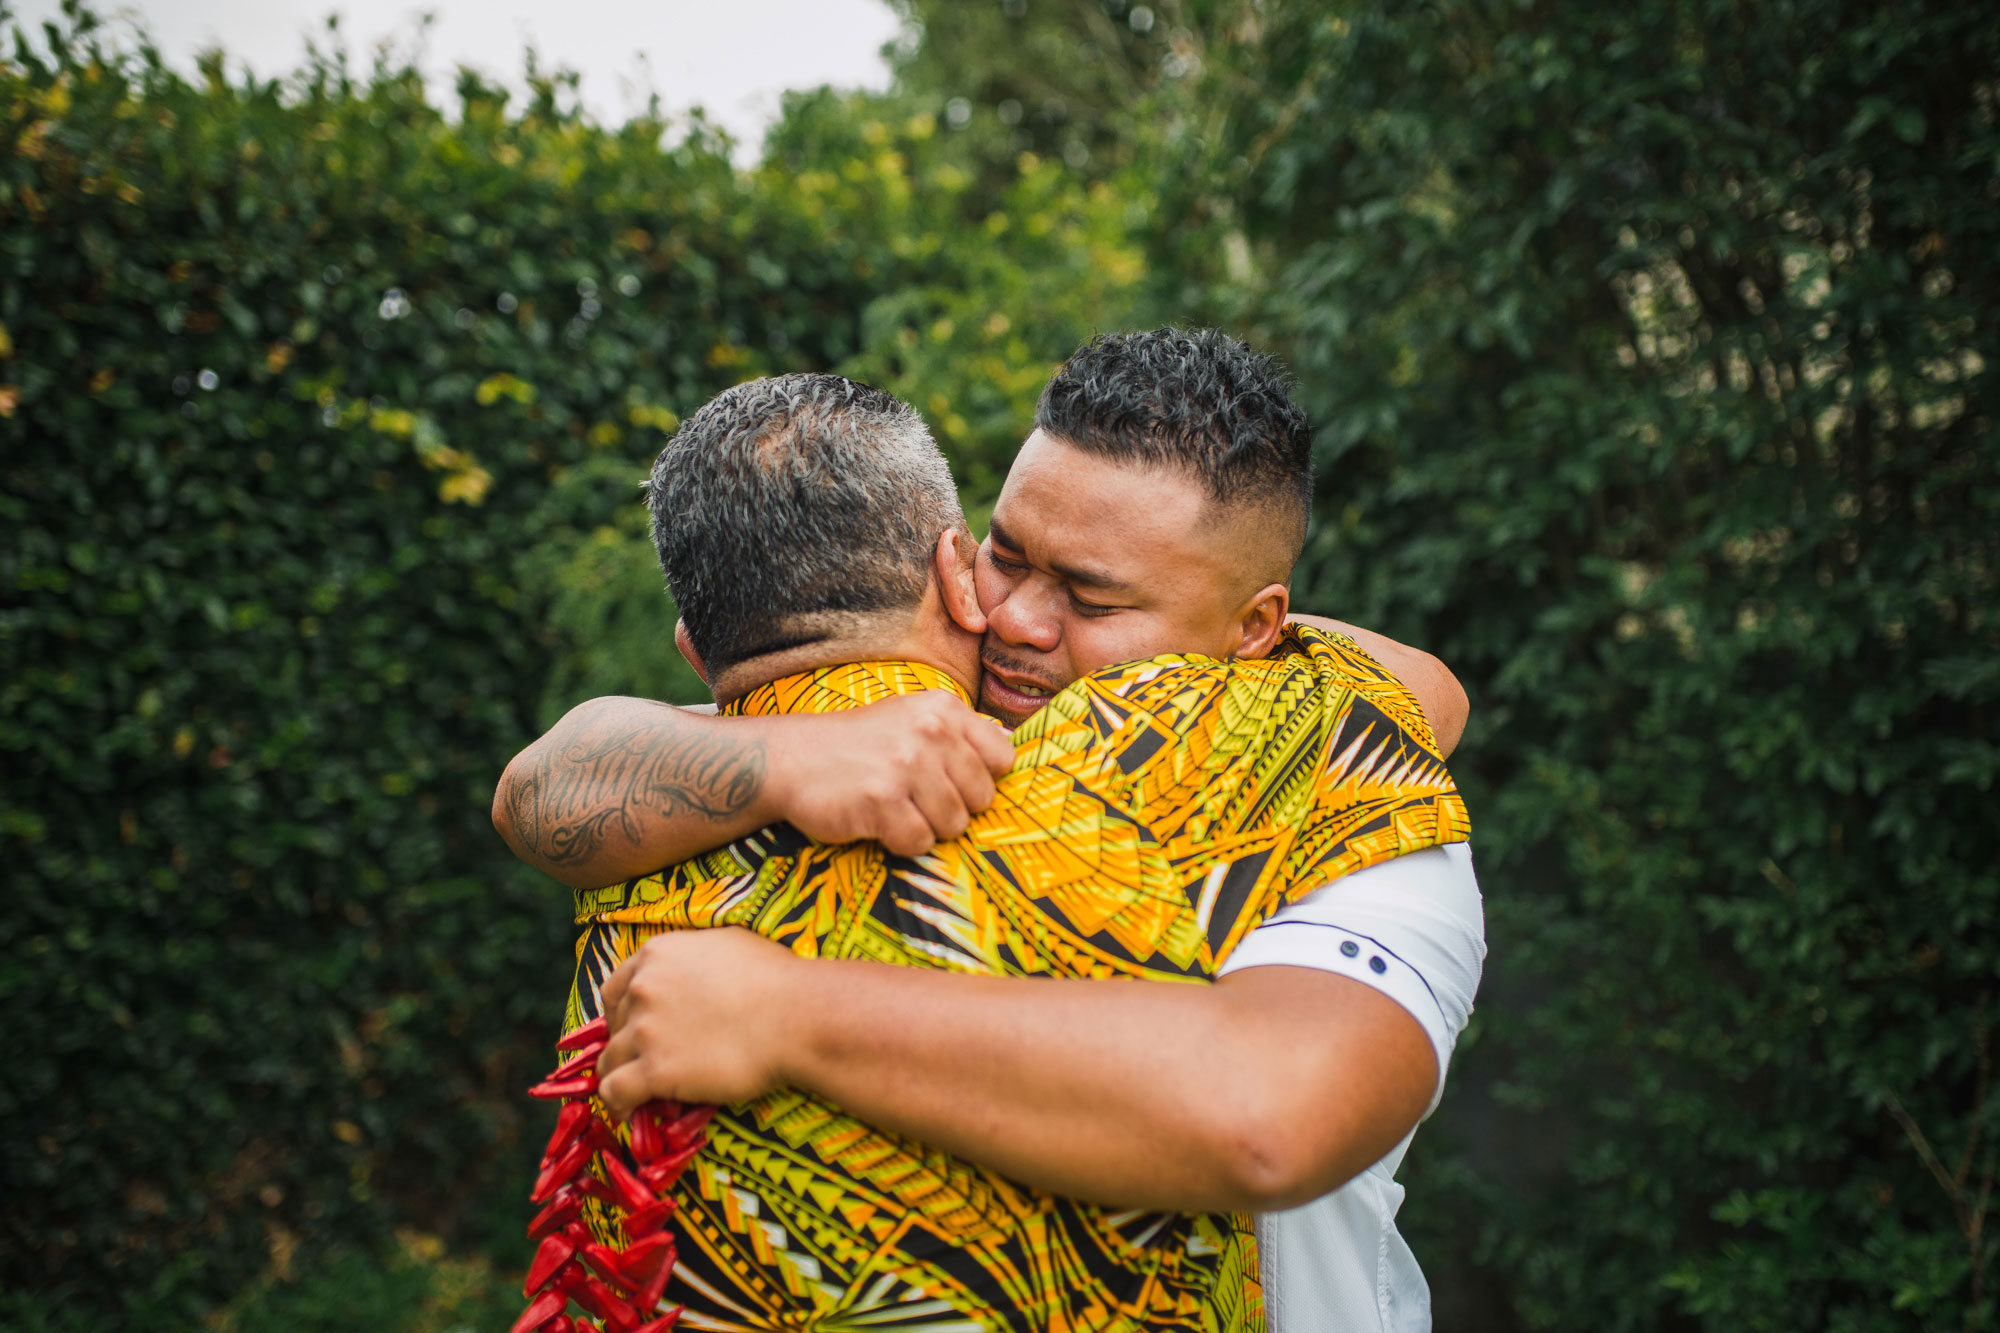 groom and his father